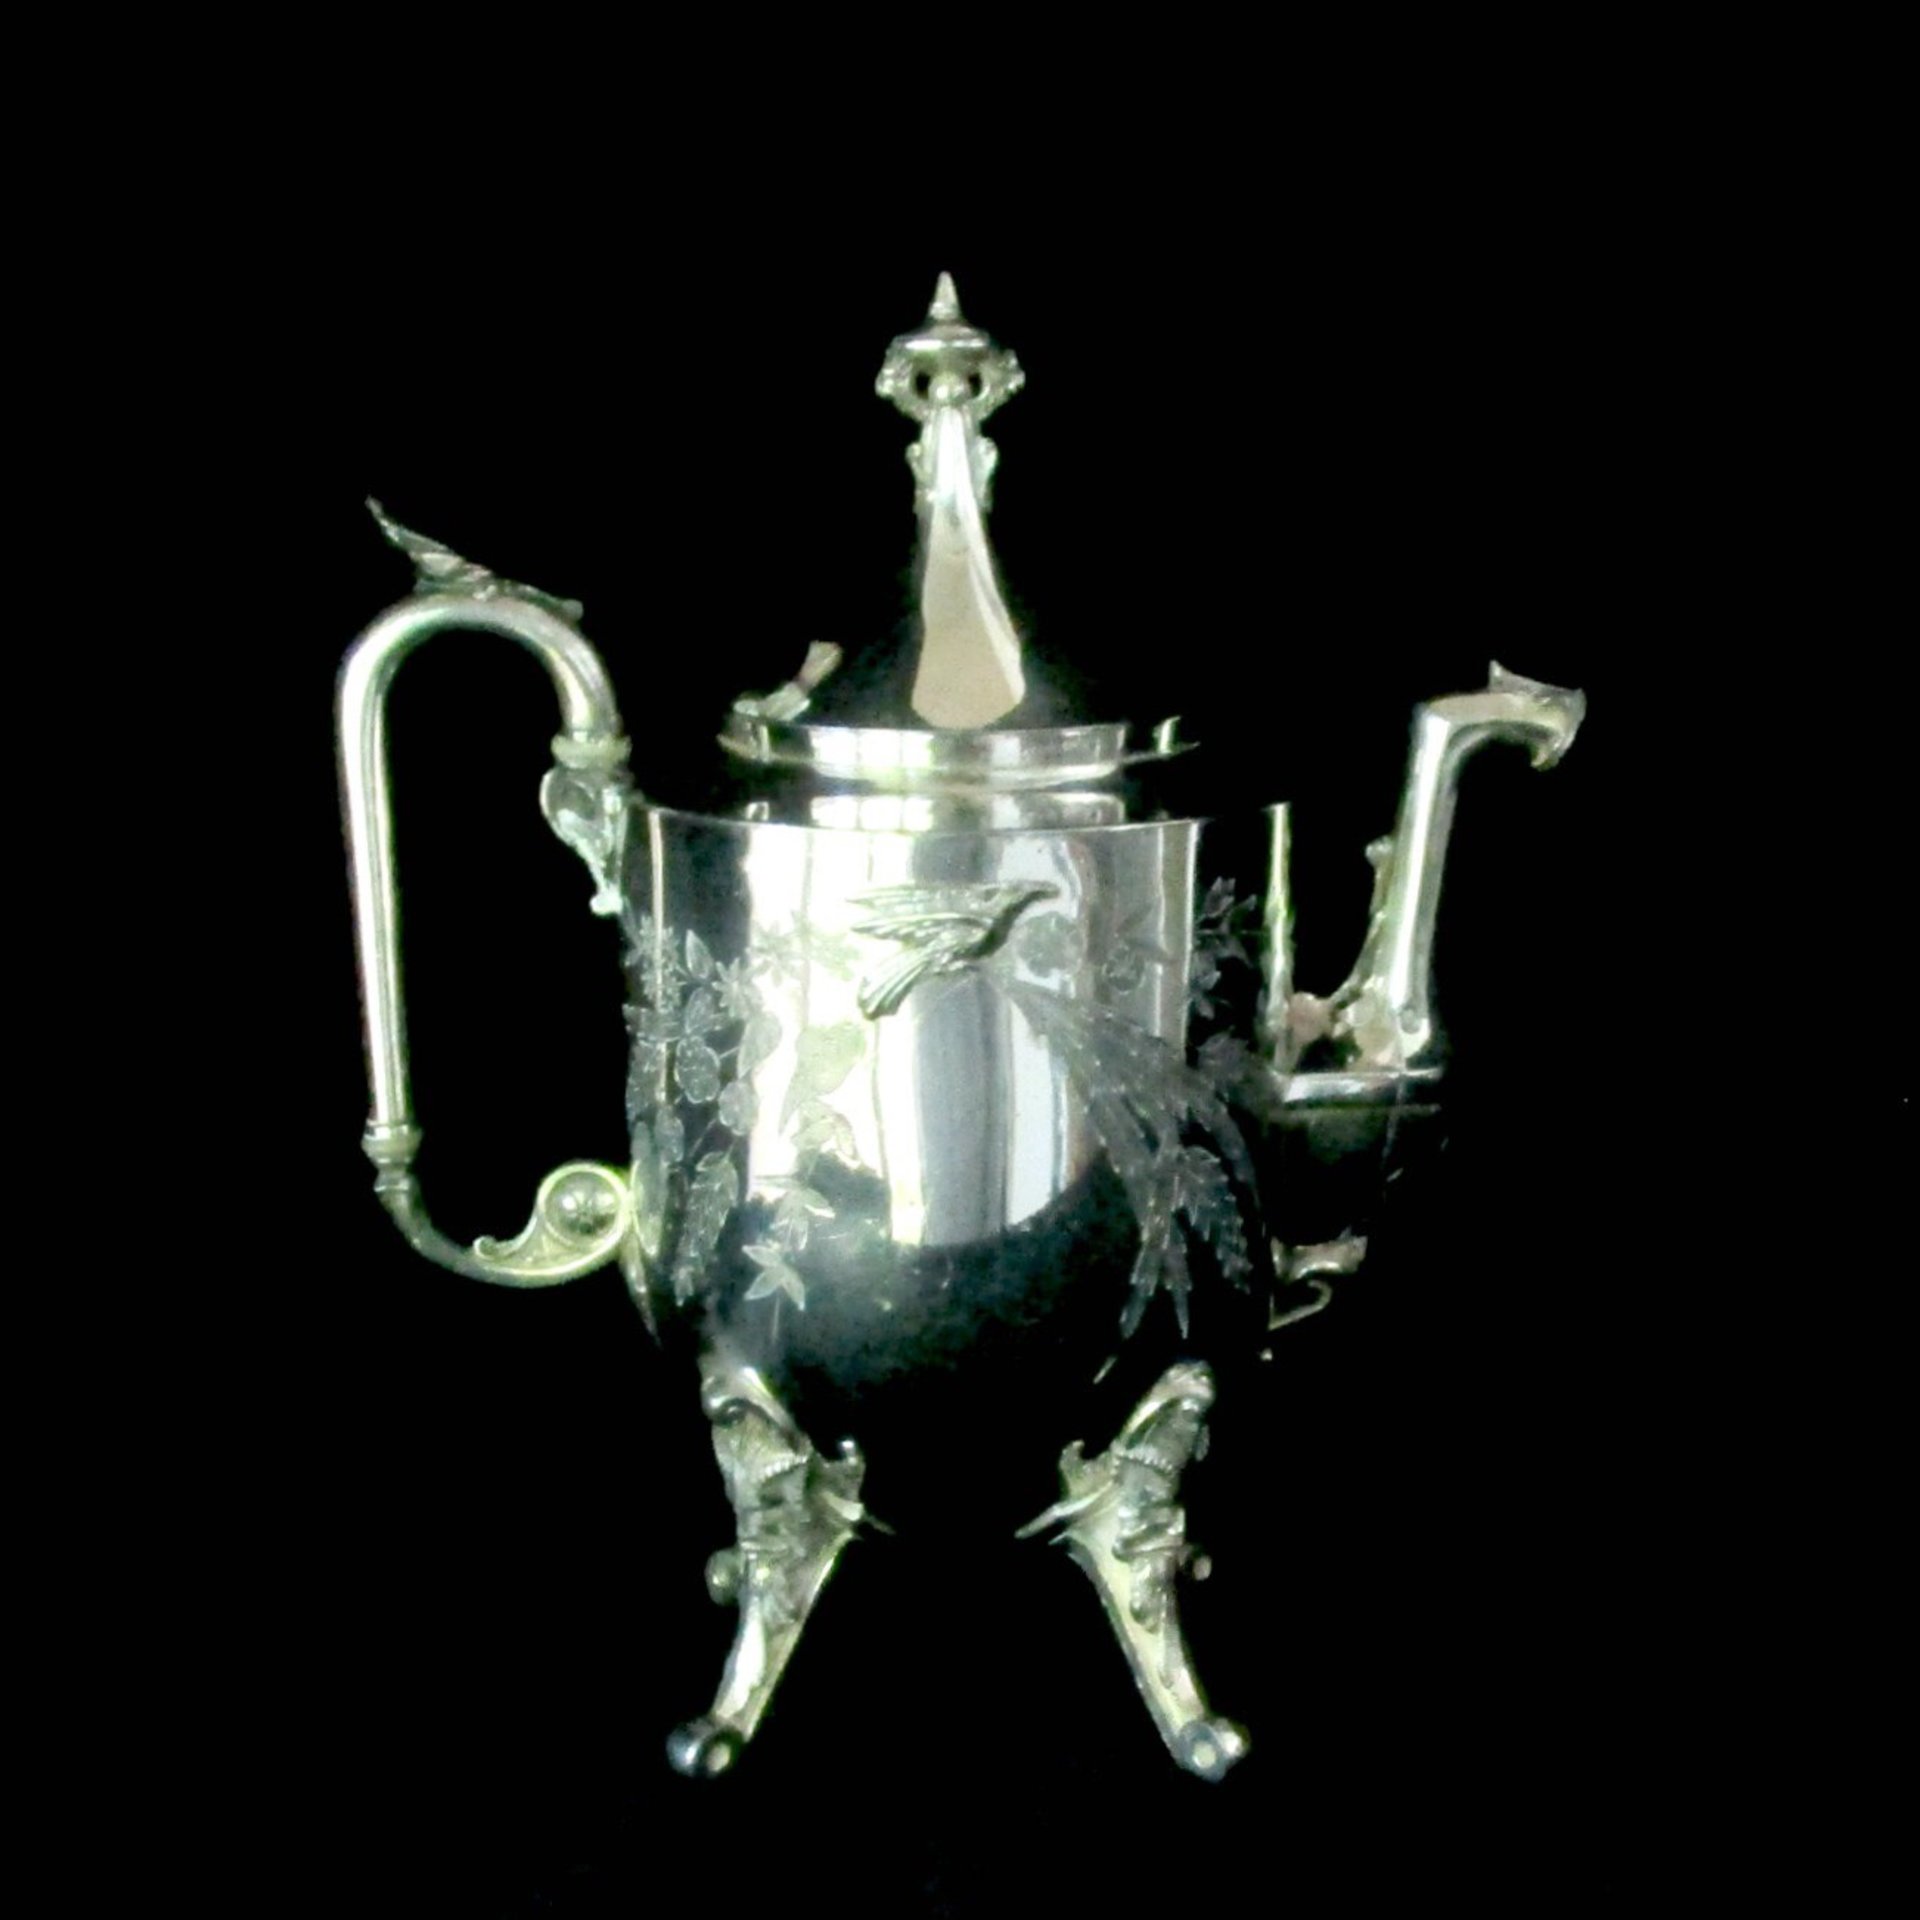 Antique Silver Plate Teapot, Reed Barton, 2076, Applied Bird, Etched Florals, Ornate Tea Pot, 1870s